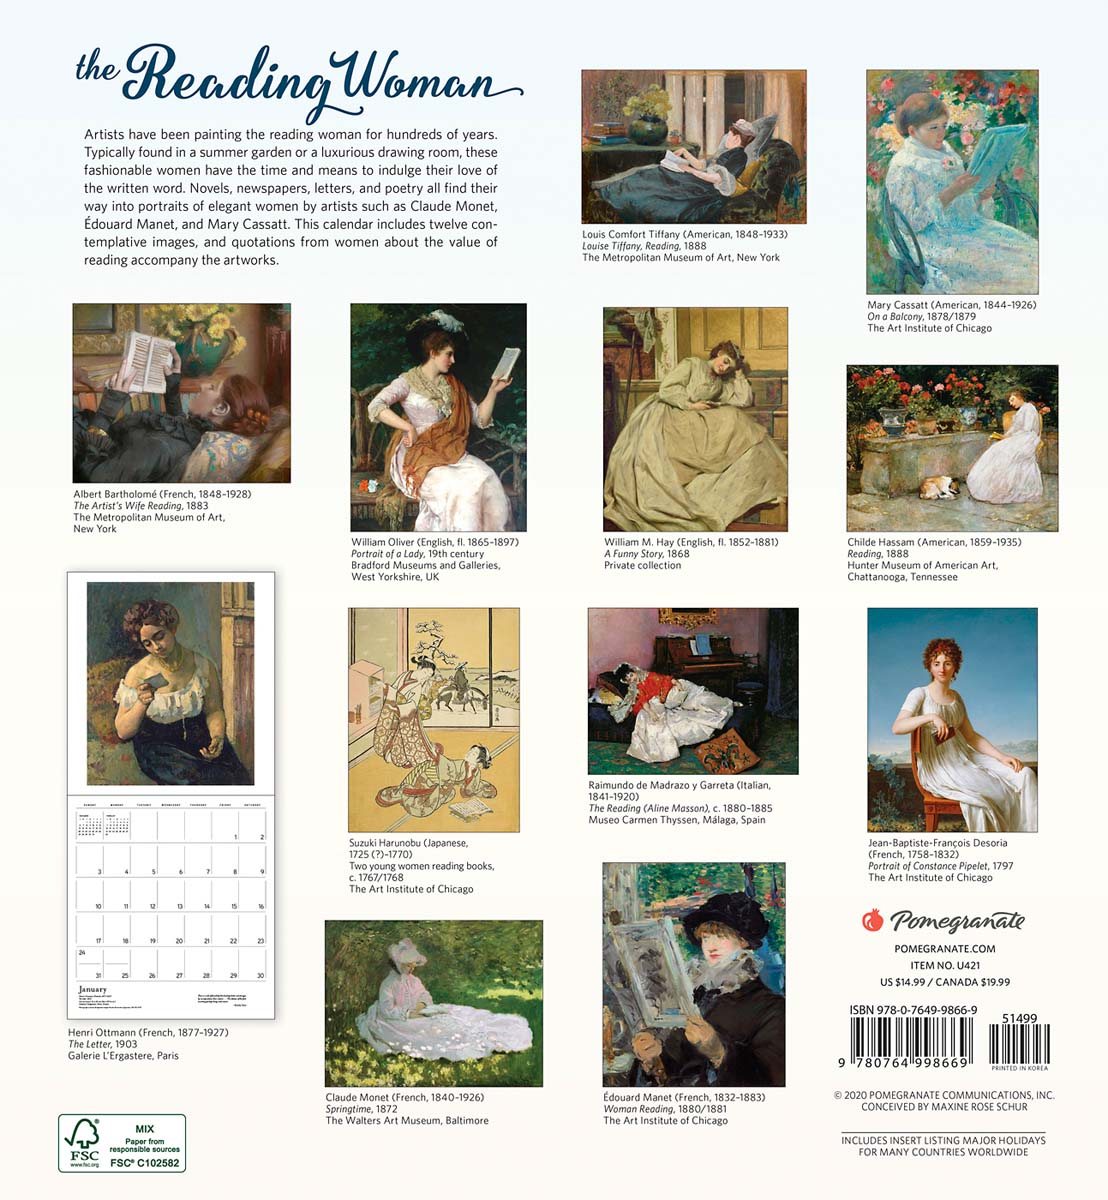 The Reading Woman 2021 Wall Calendar by Pomegranate Communications